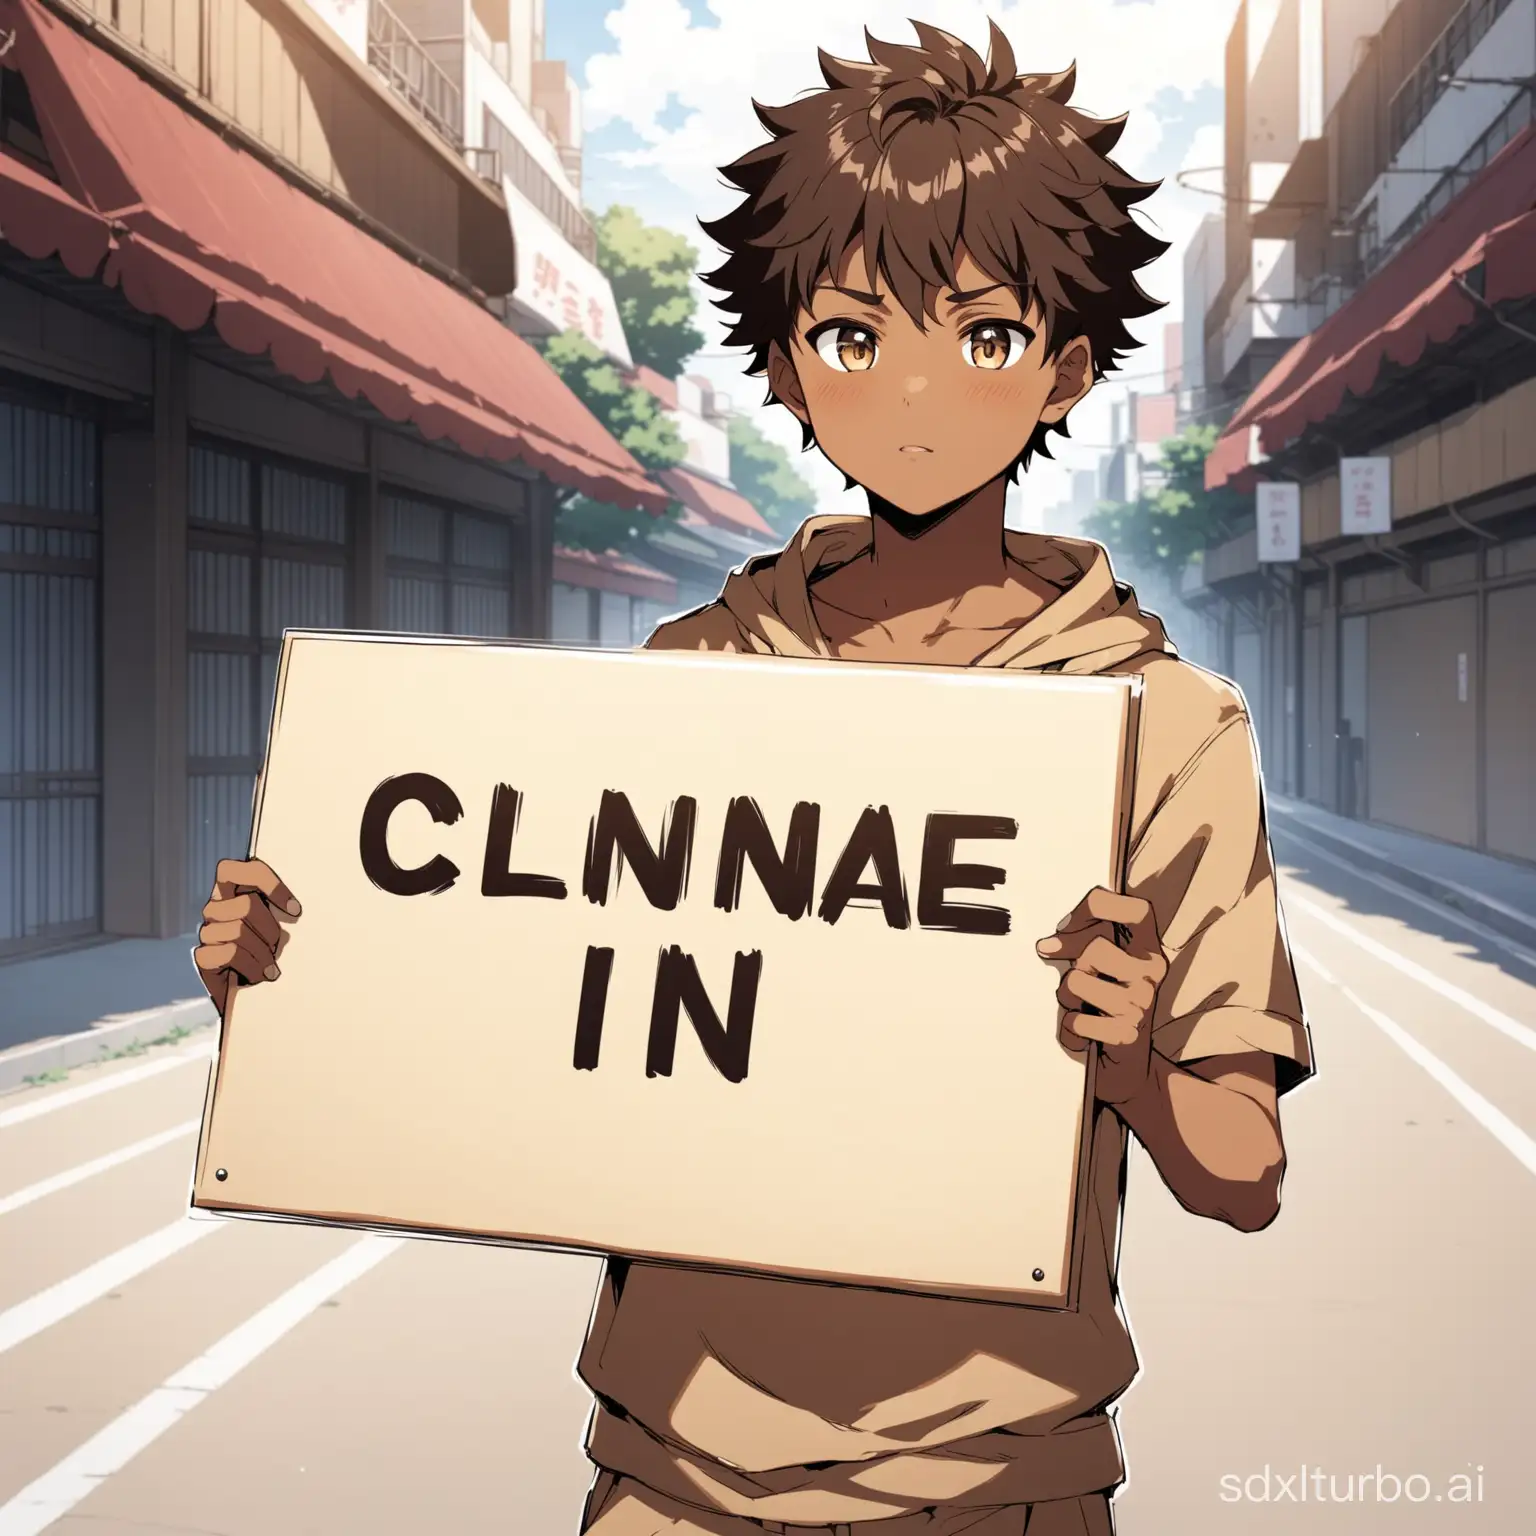 Anime boy with light brown skin color holding a sign